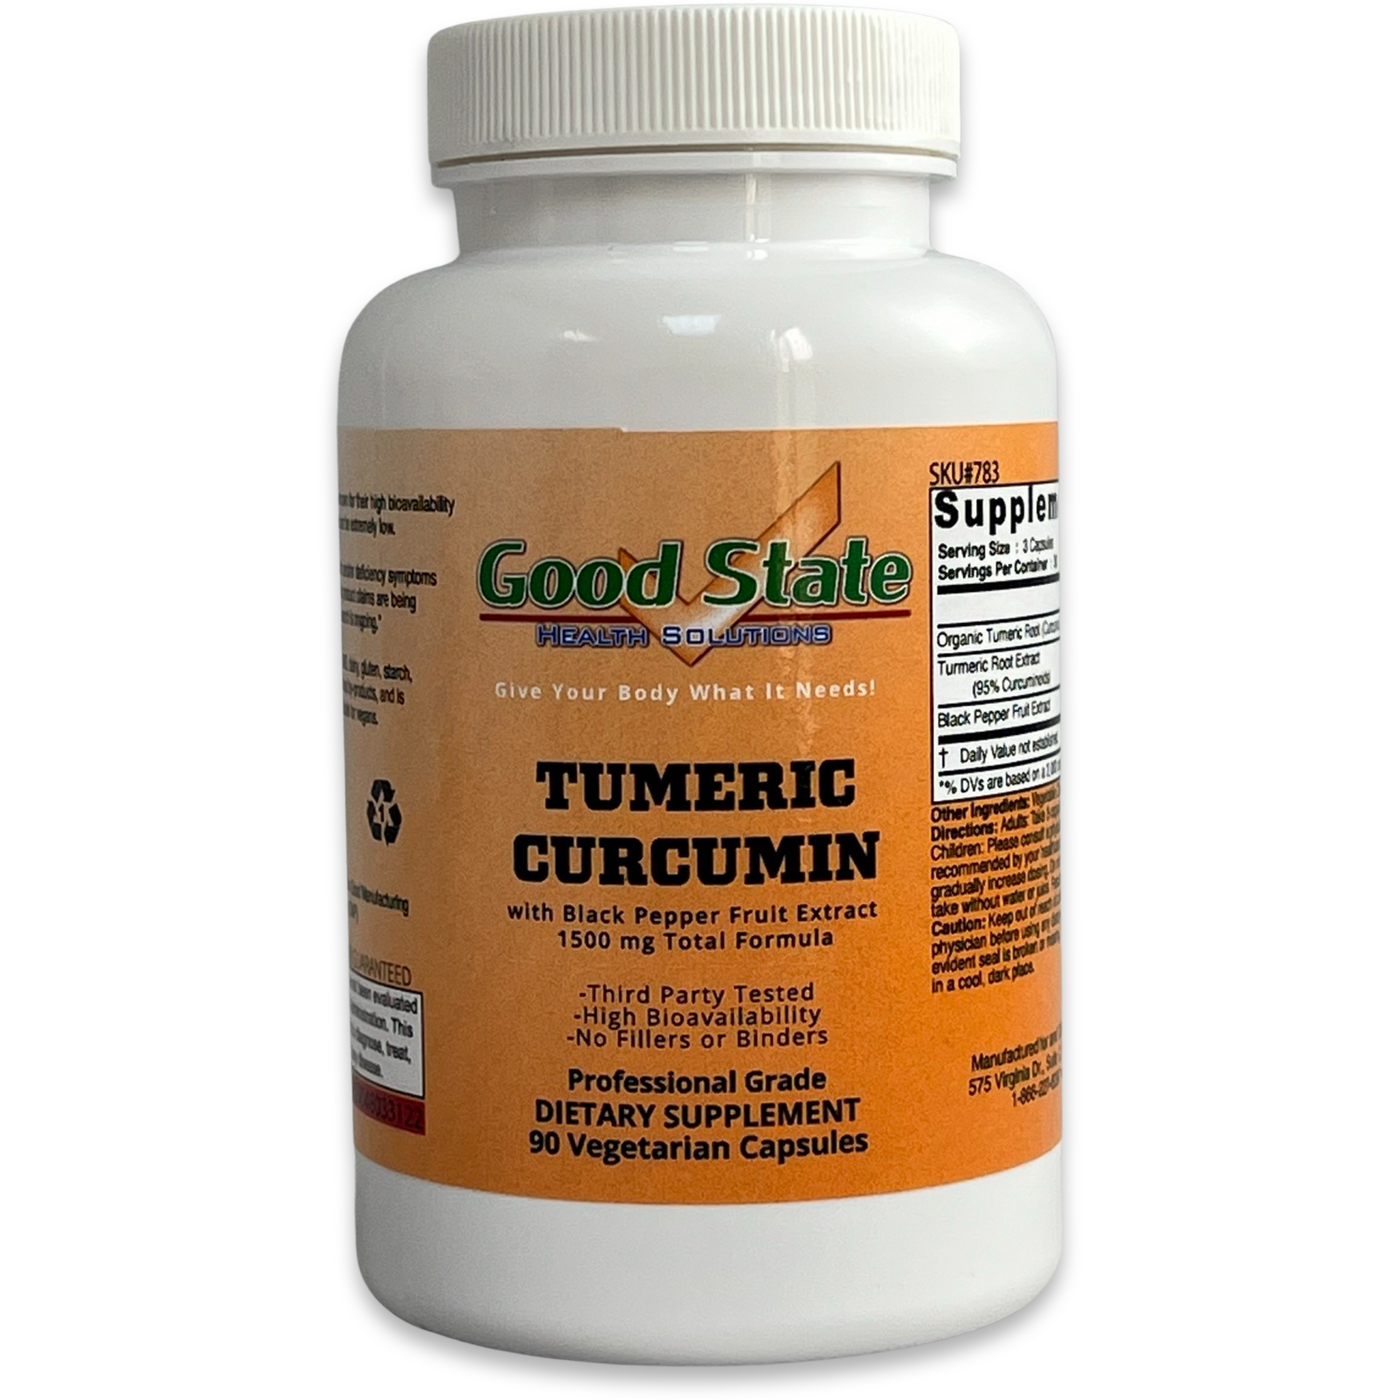 Turmeric Curcumin with Black Pepper Extract 1500mg - Natural Joint Support with 95% Standardized Curcuminoids & Black Pepper Extract for Ultra High Absorption & Potency - Non GMO - Gluten Free - 90 Capsules